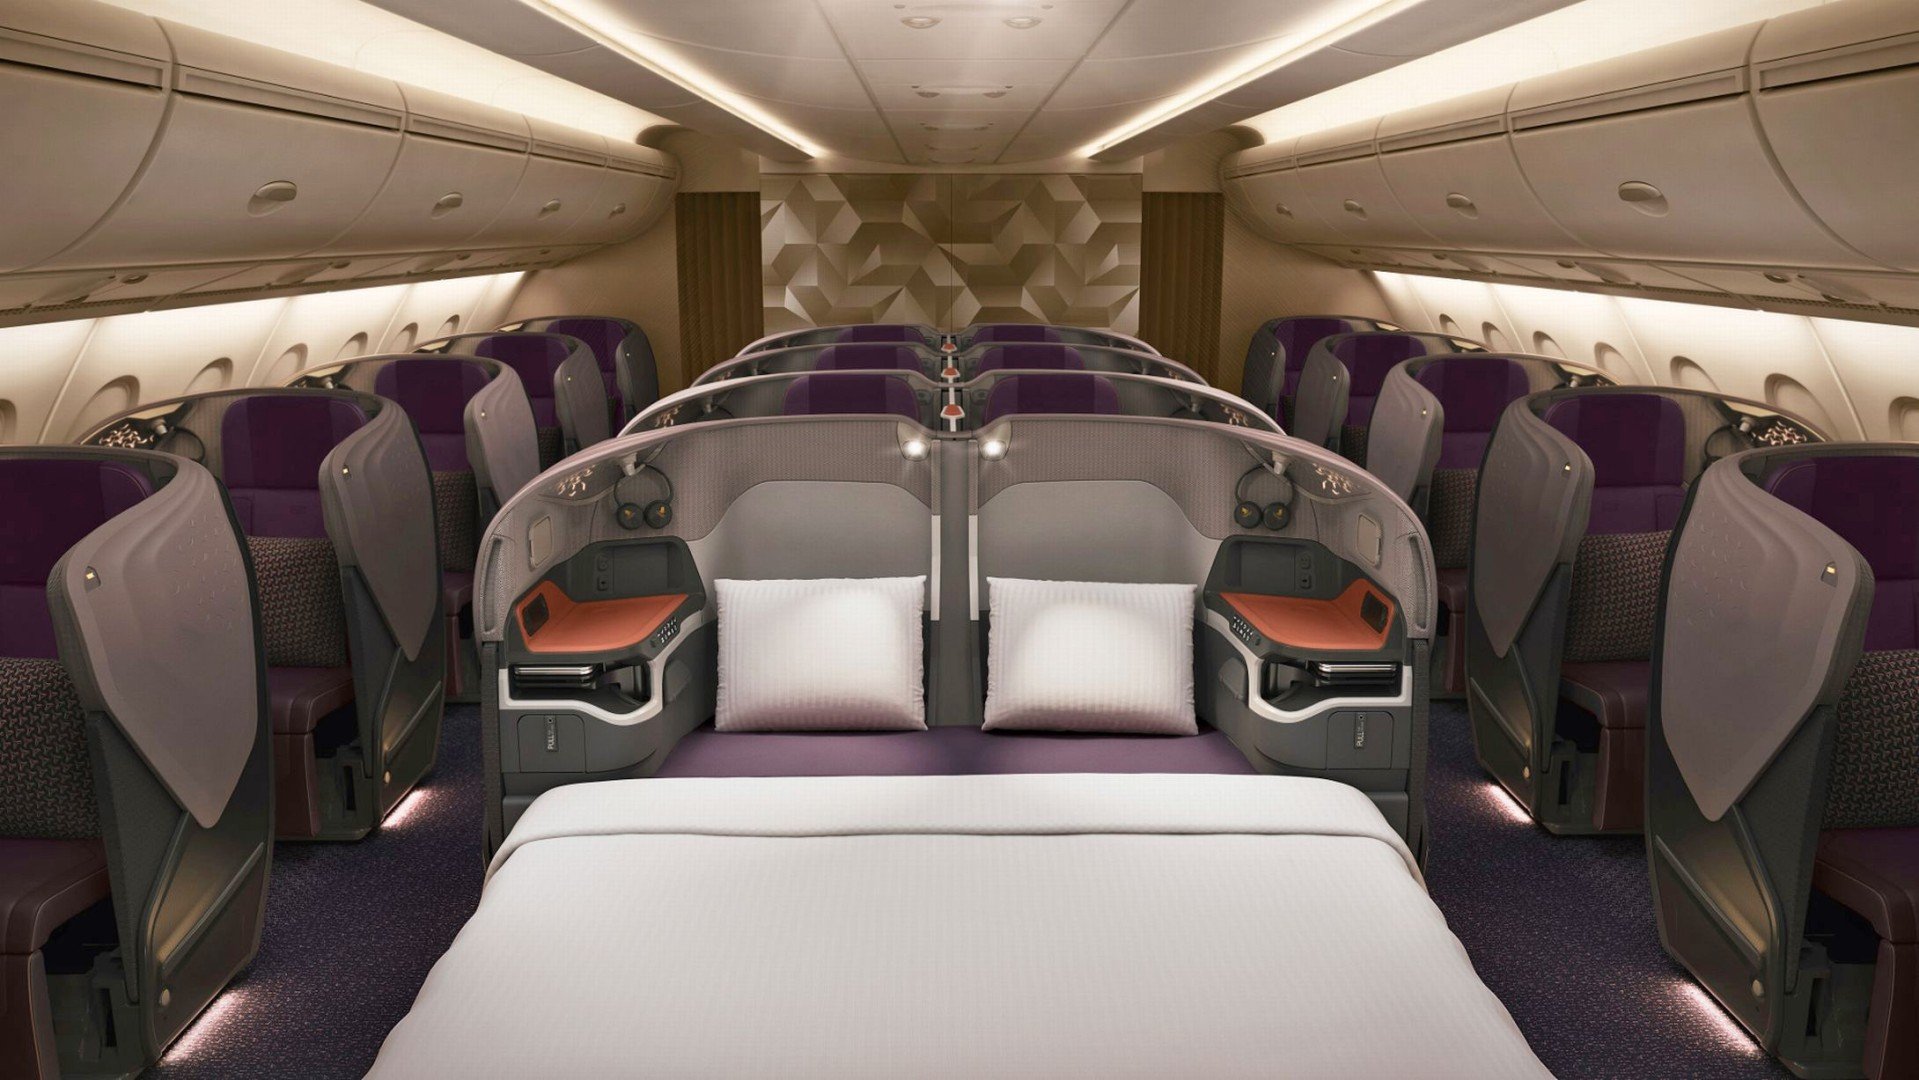 Airbus A380 inside